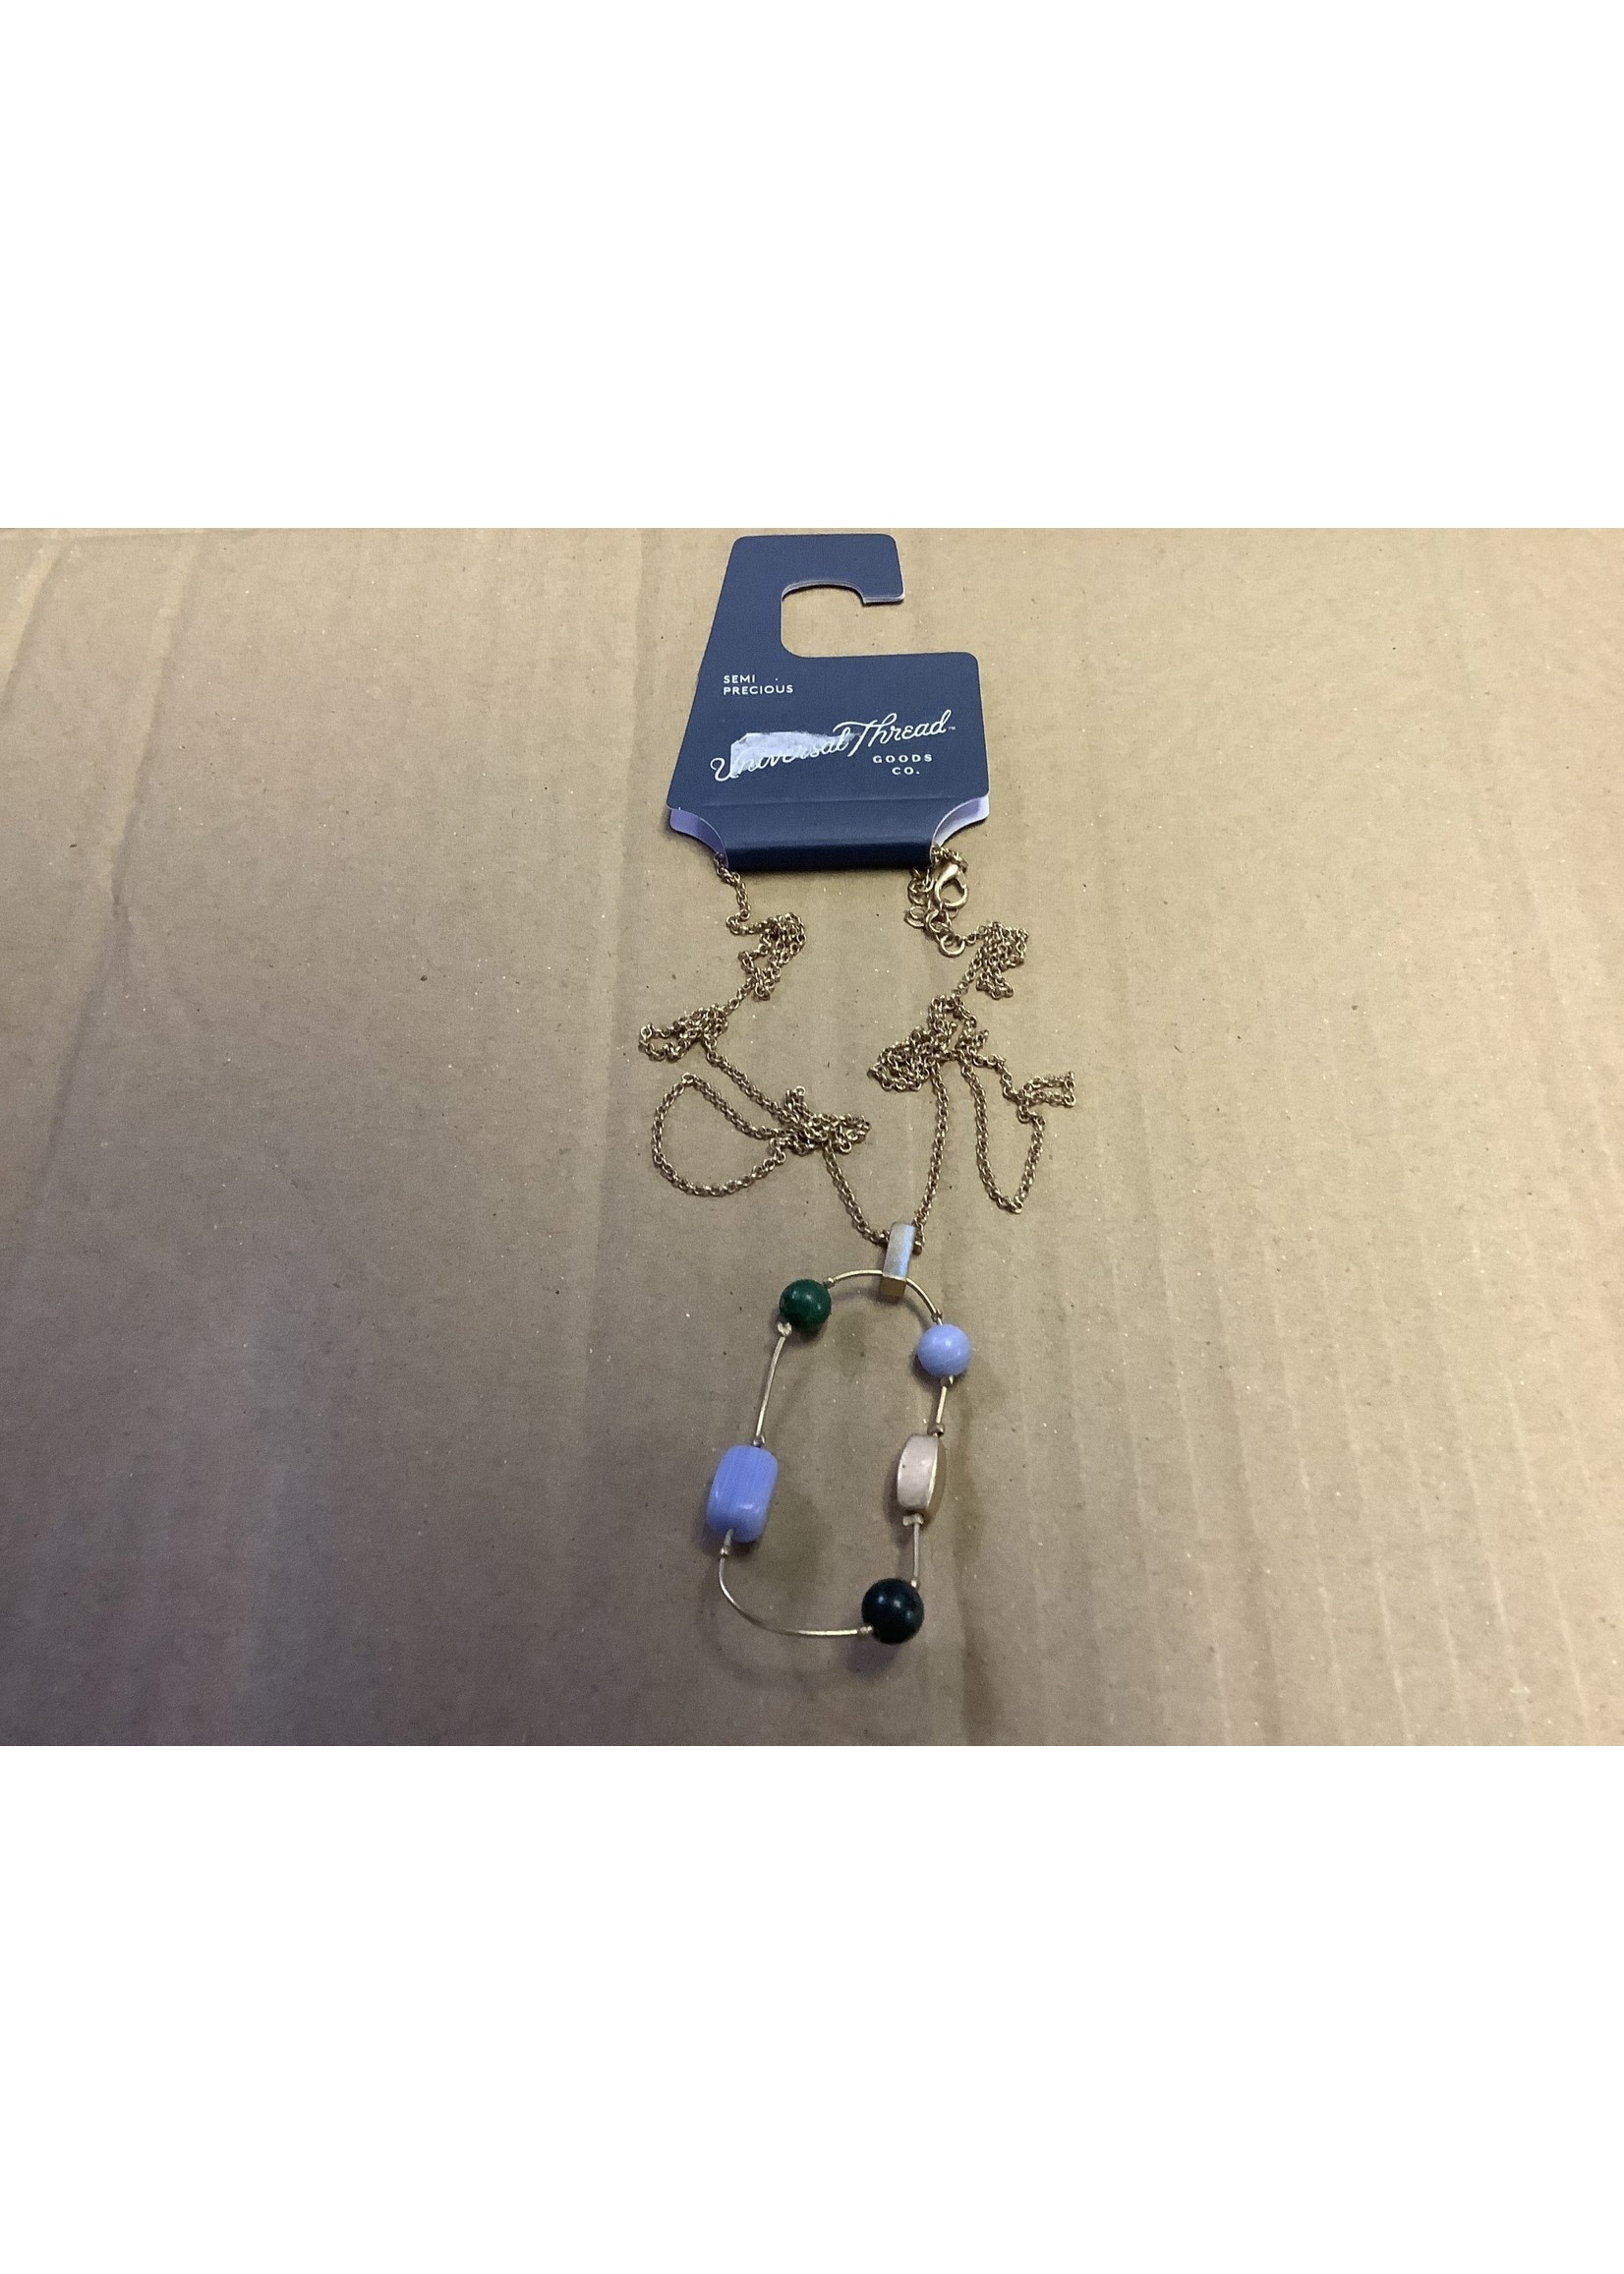 Oval Wire with Stationed Mixed Semi-Precious Beads Pendant Necklace - Universal Thread Green